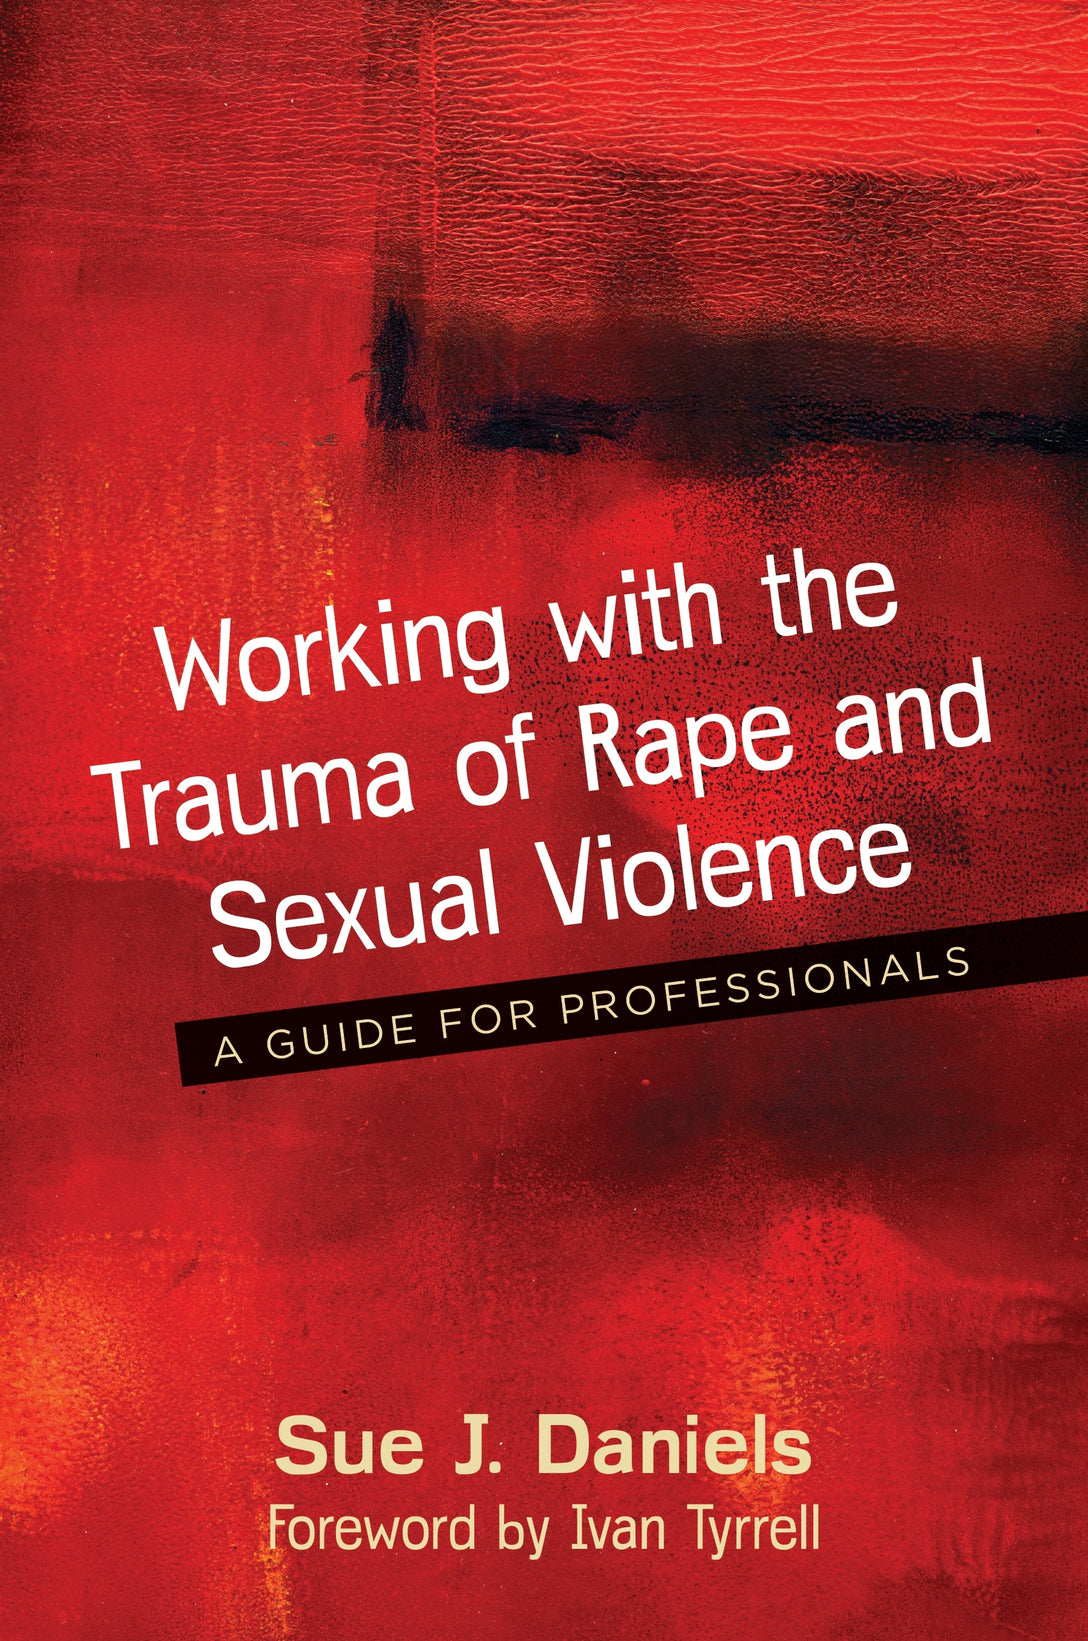 Working with the Trauma of Rape and Sexual Violence by Sue J. Daniels, Ivan Tyrrell